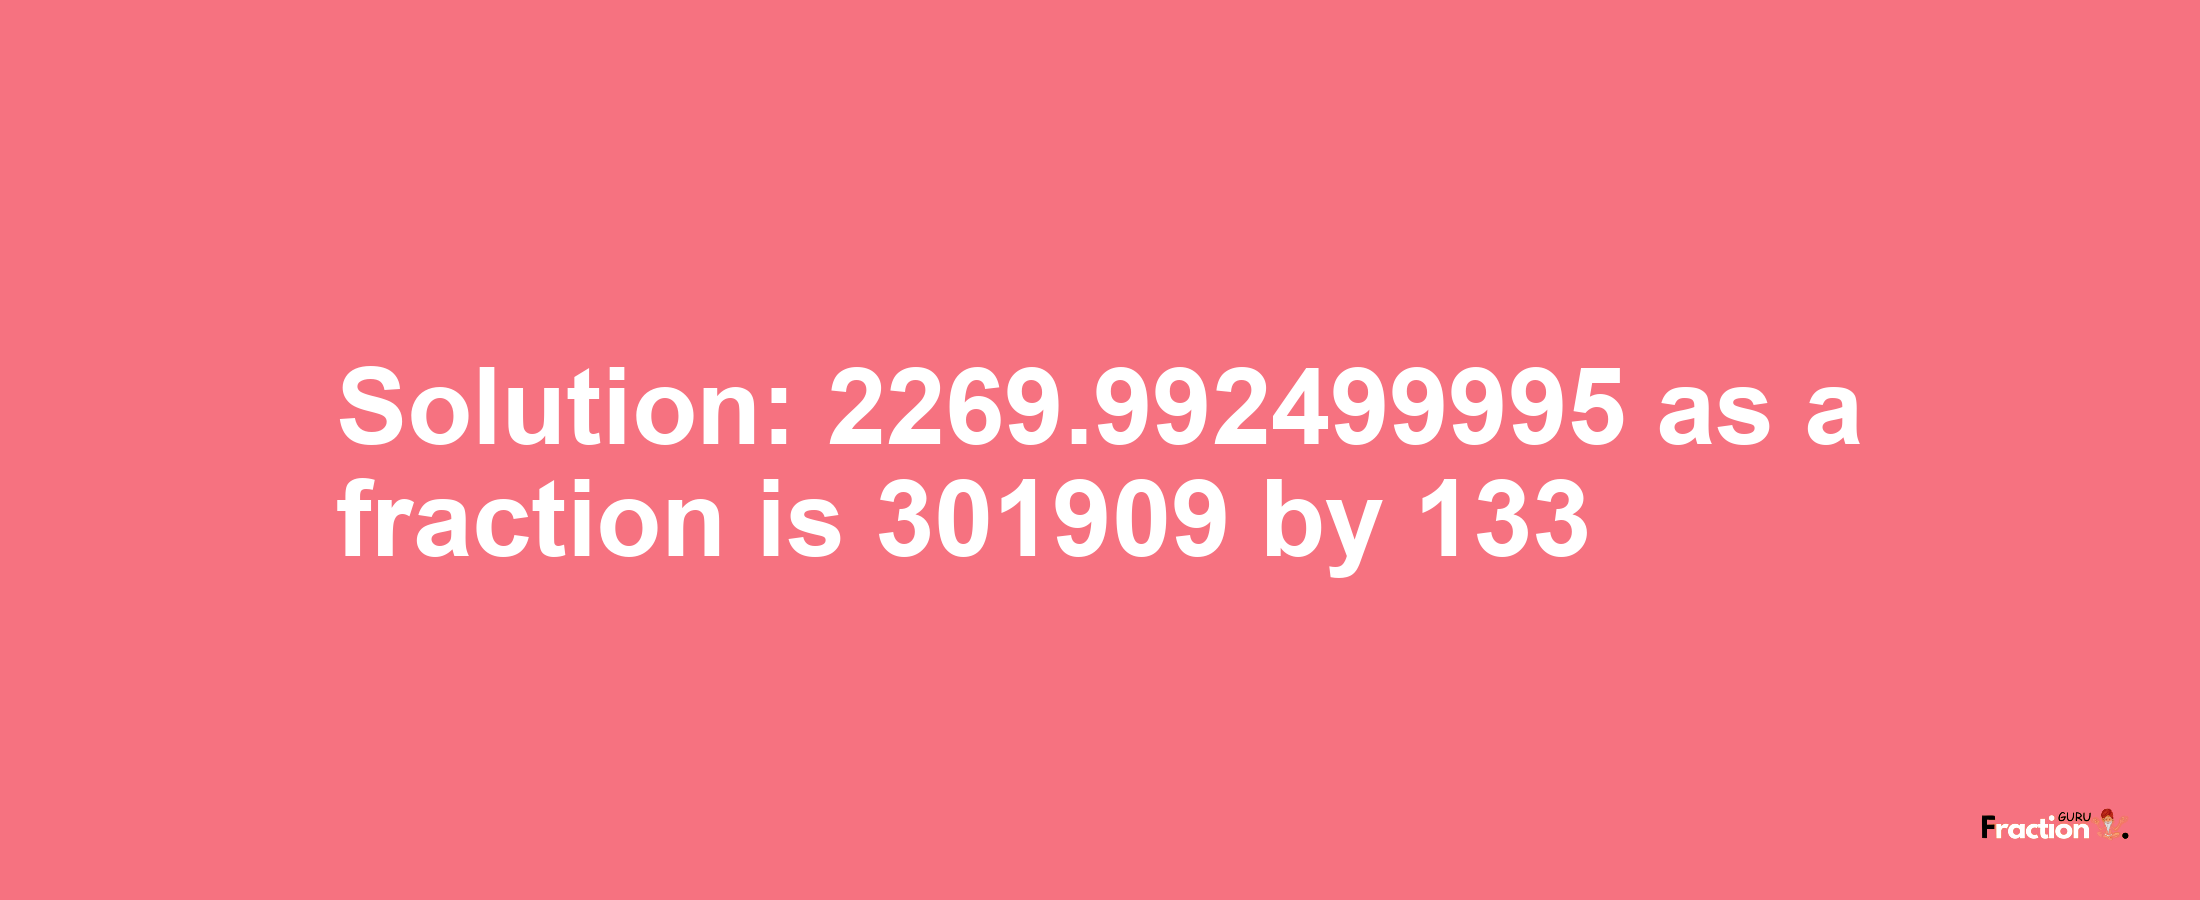 Solution:2269.992499995 as a fraction is 301909/133